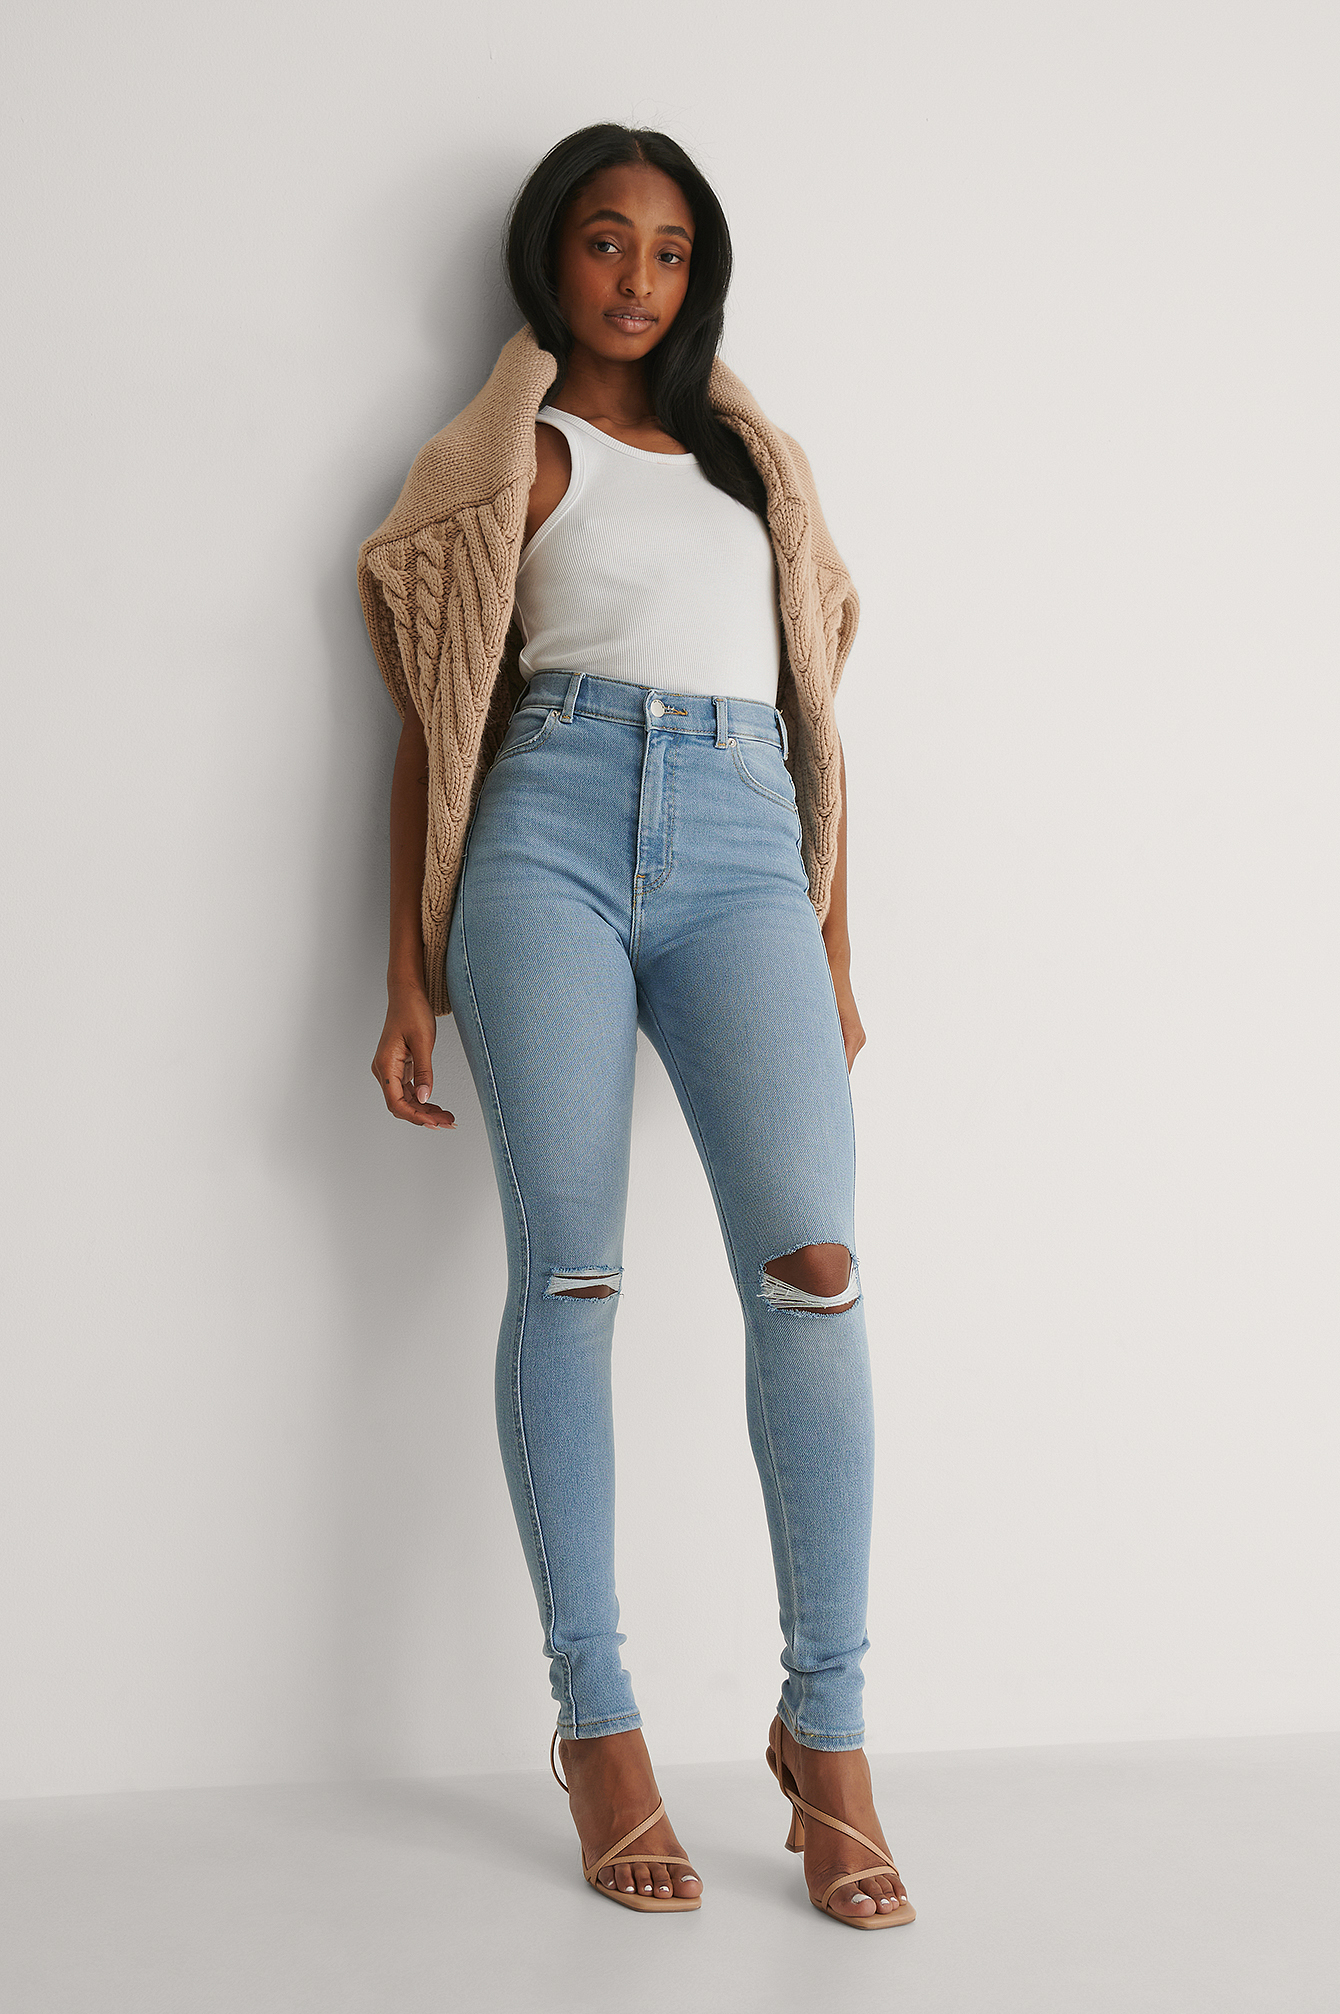 Dr. Denim Moxy Jeans Outfit